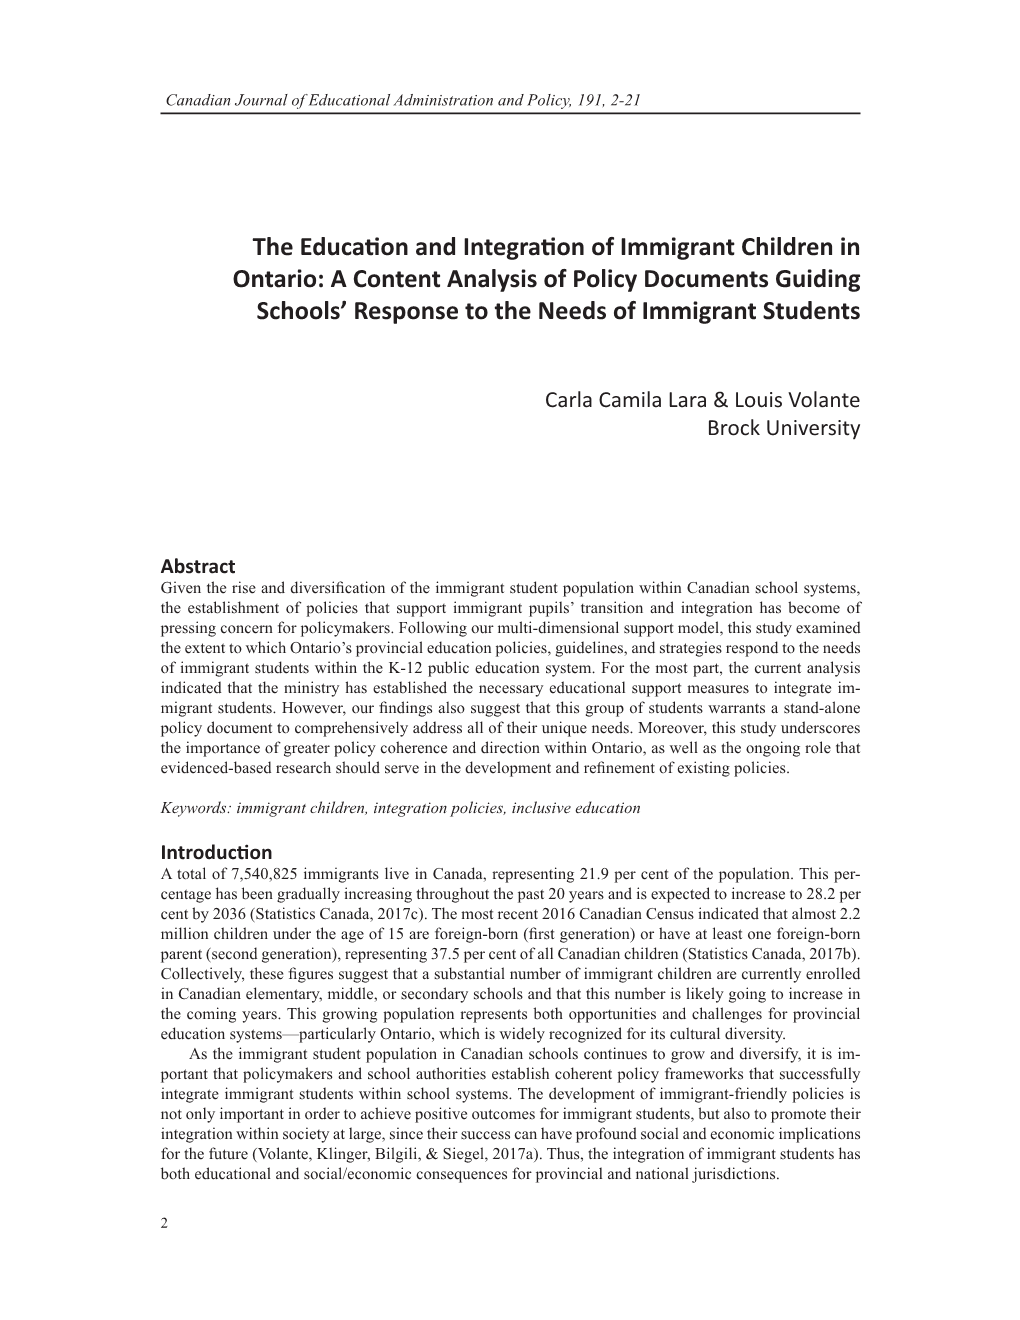 The Education and Integration of Immigrant Children in Ontario: a Content Analysis of Policy Documents Guiding Schools’ Response to the Needs of Immigrant Students